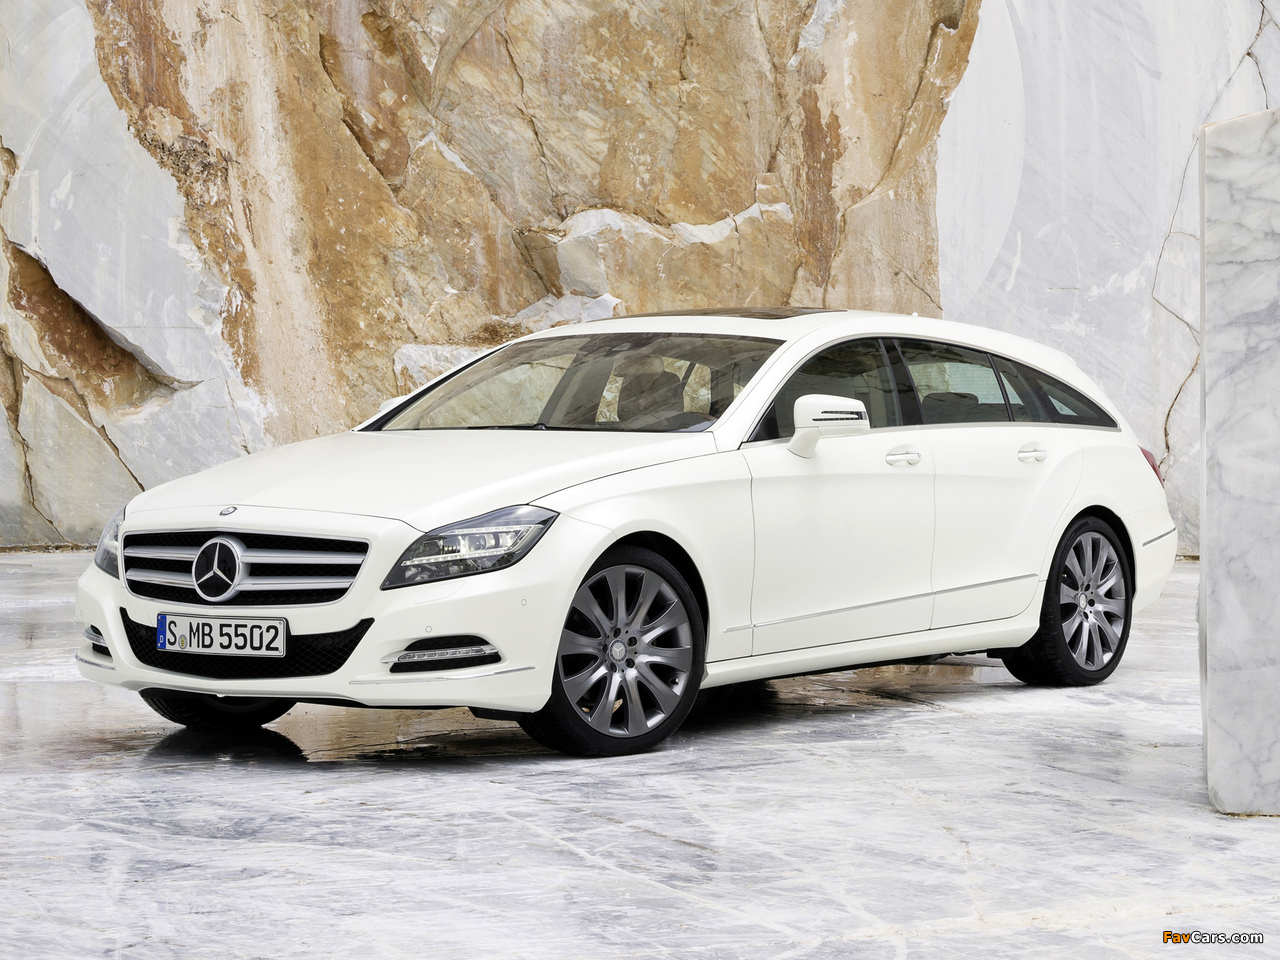 Mercedes-Benz CLS 250 CDI Shooting Brake (X218) 2012 pictures (1280 x 960)